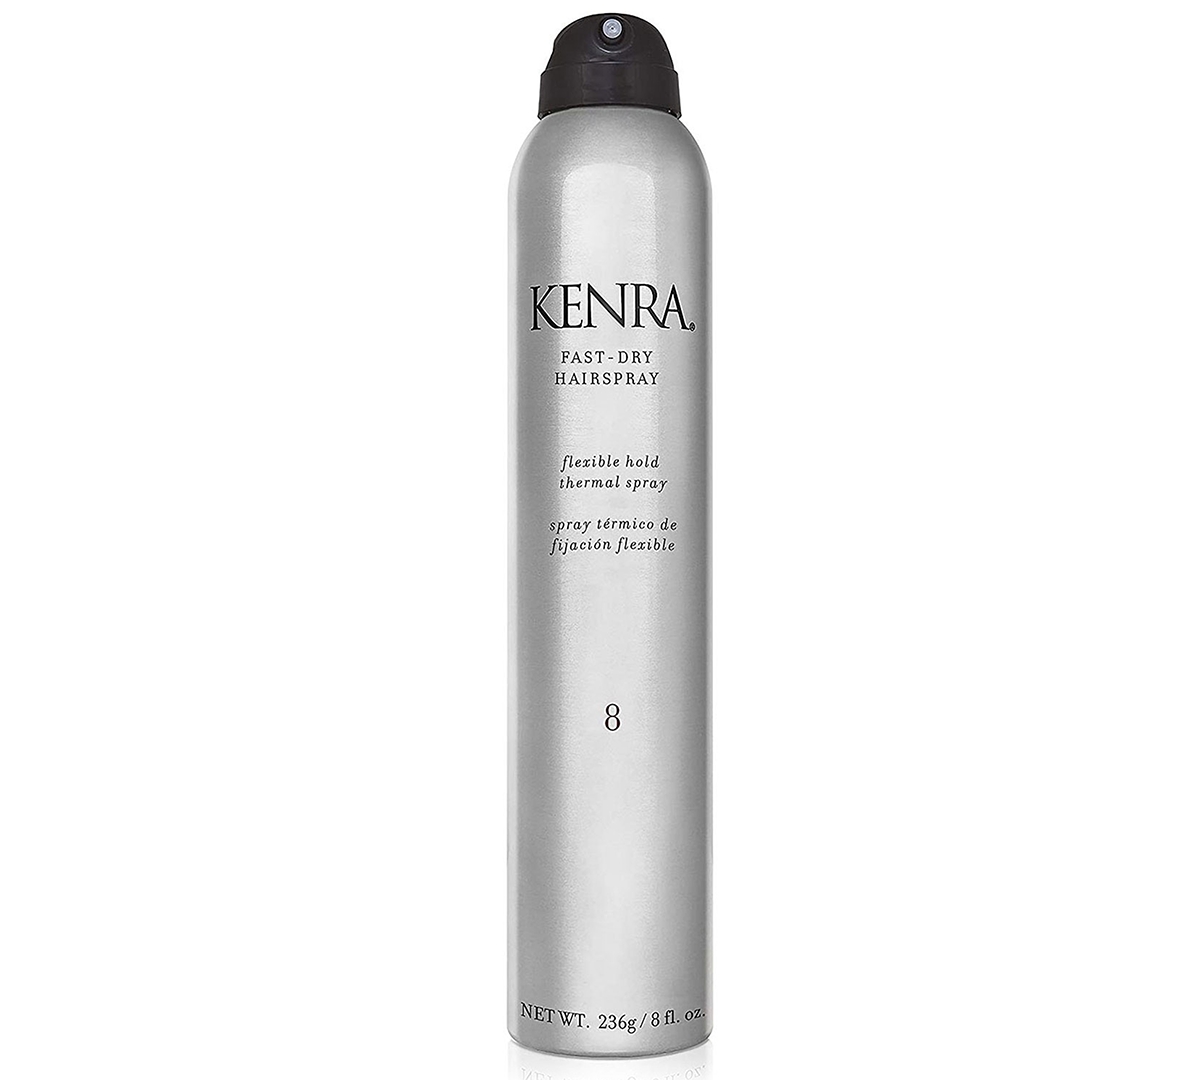 UPC 014926067108 product image for Kenra Professional Fast-Dry Hairspray 8, from Purebeauty Salon & Spa 8 oz. | upcitemdb.com